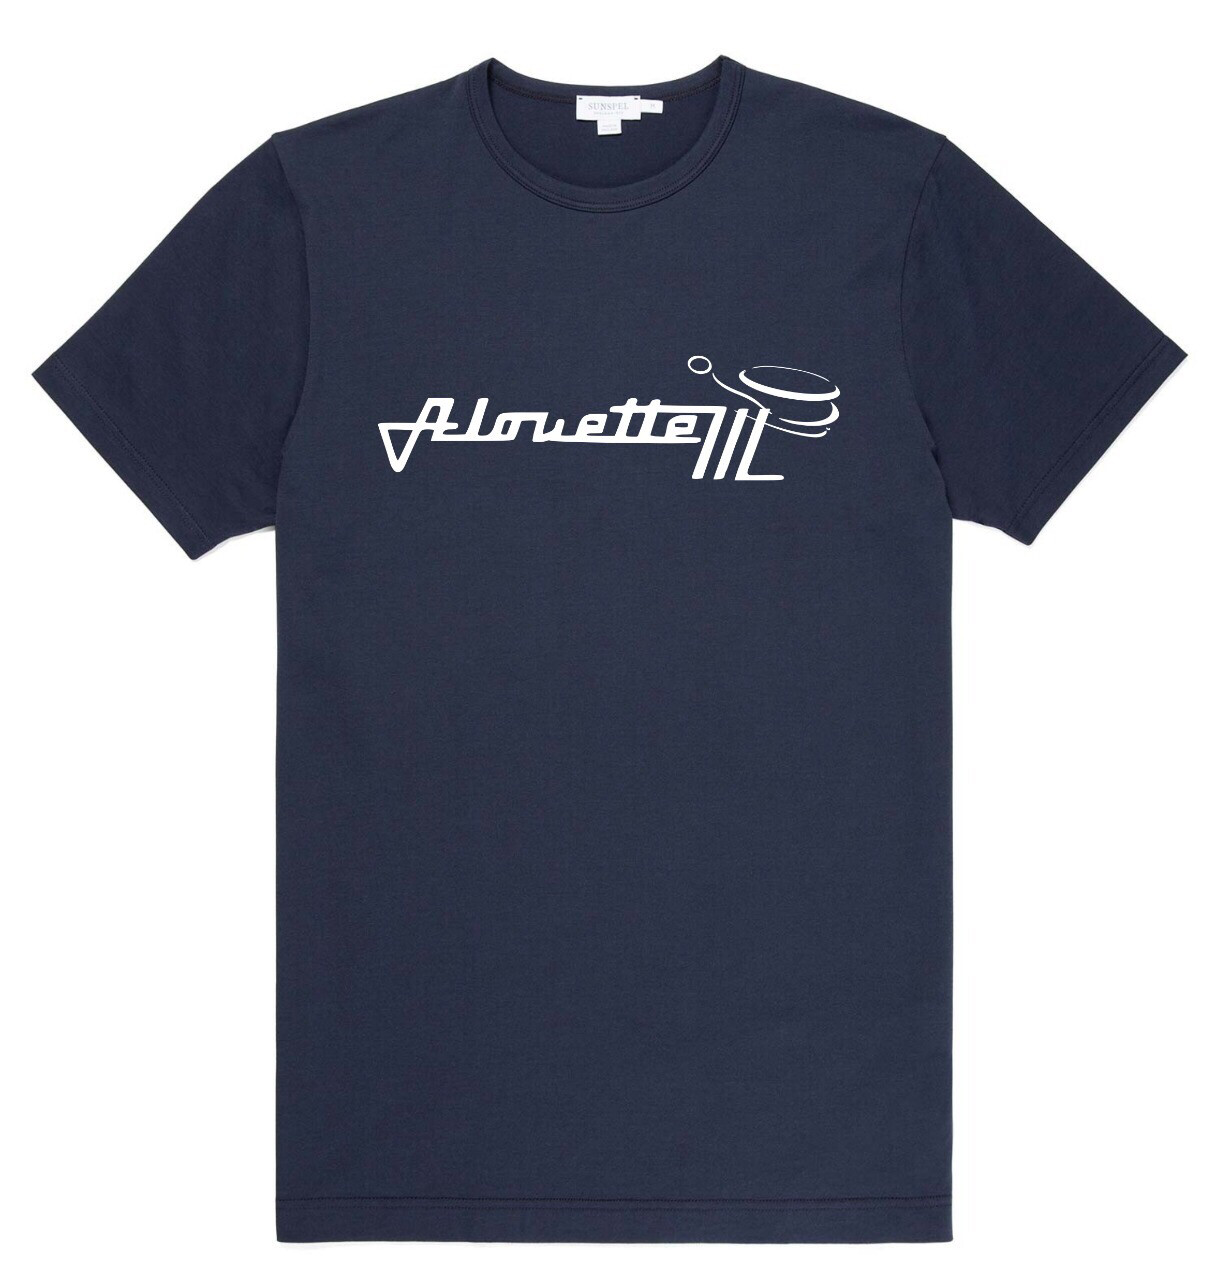 Alouette III Helicopter T-Shirt with Tech Spec on back